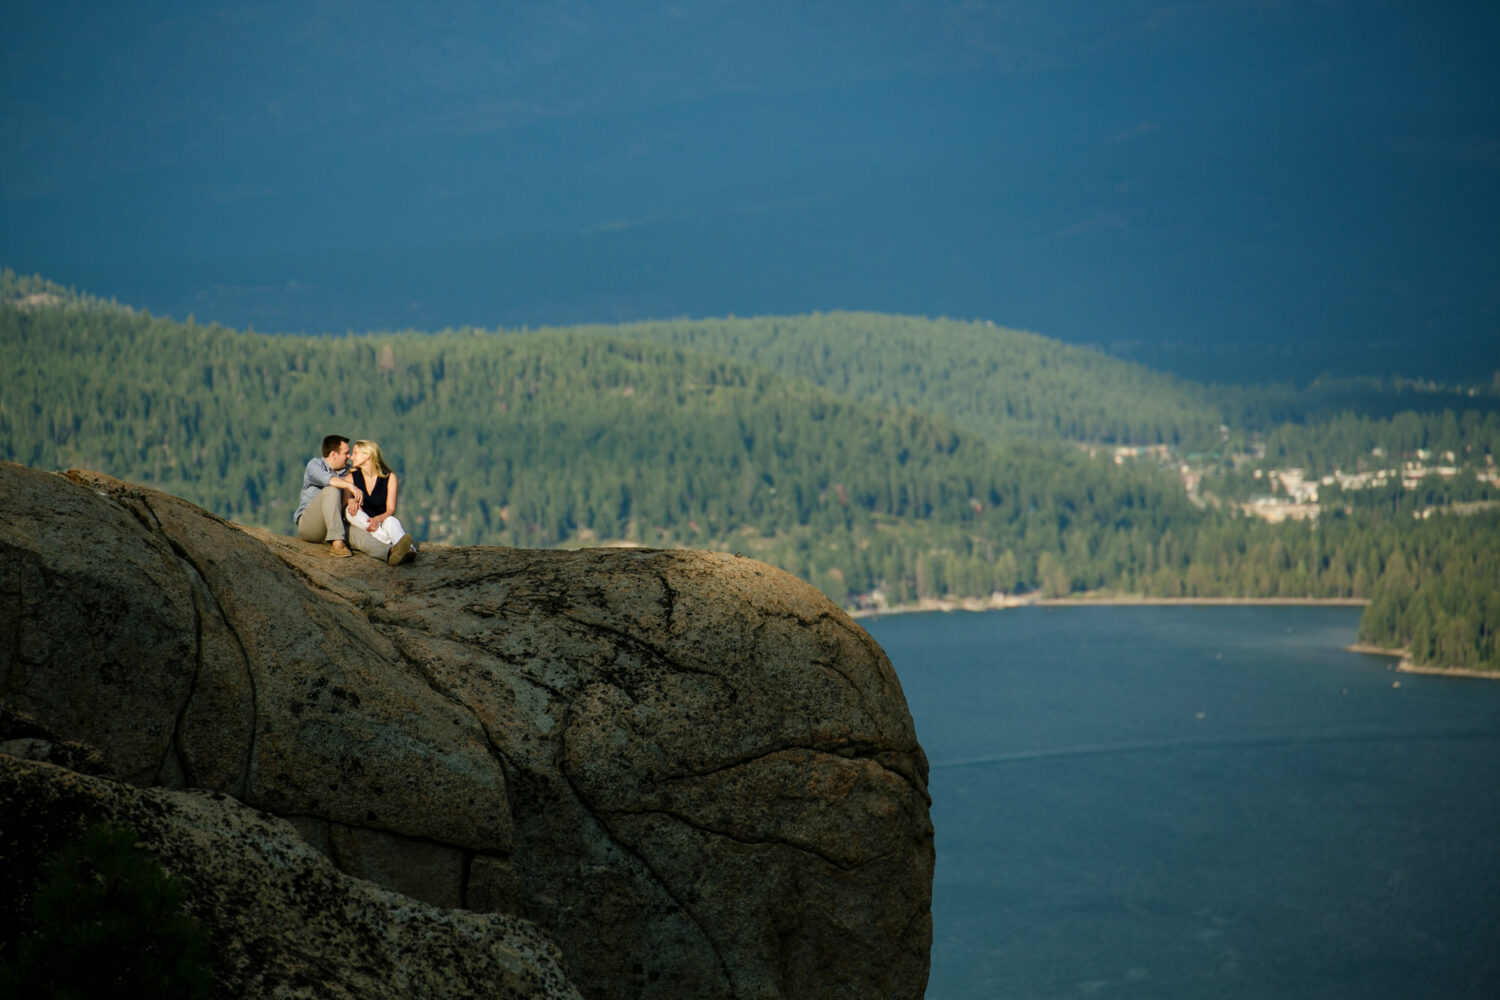 A romantic moment for a couple during an engagement photoshoot on a mountaintop with forests and a lake in the background. 